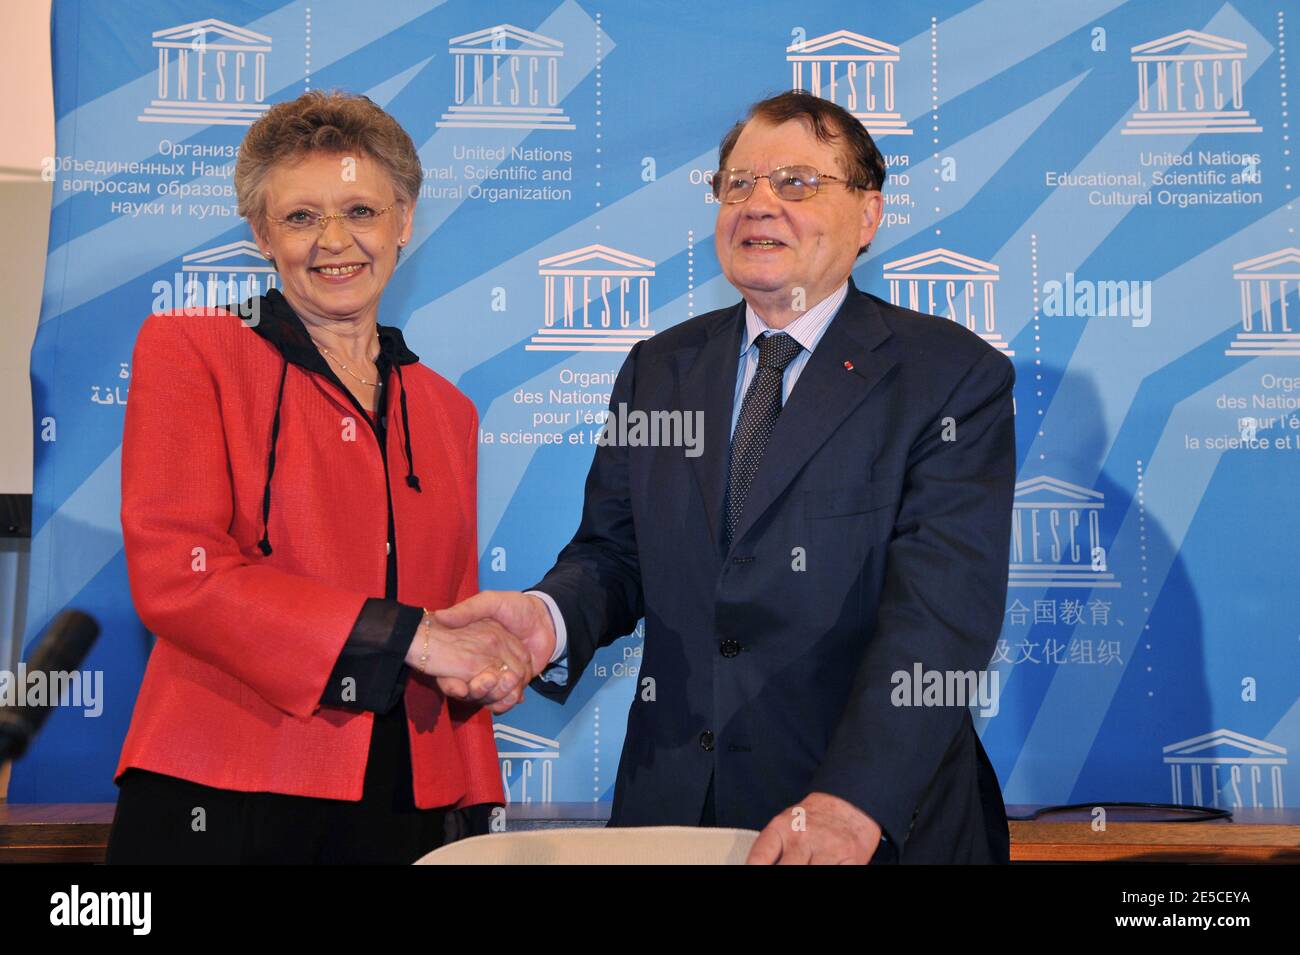 2008 Nobel medicine Prize winners Francoise Barre-Sinoussi and Luc  Montagnier during a press conference at UNESCO headquarters in Paris,  France, on October 8, 2008. Photo by Mousse/ABACAPRESS.COM Stock Photo -  Alamy